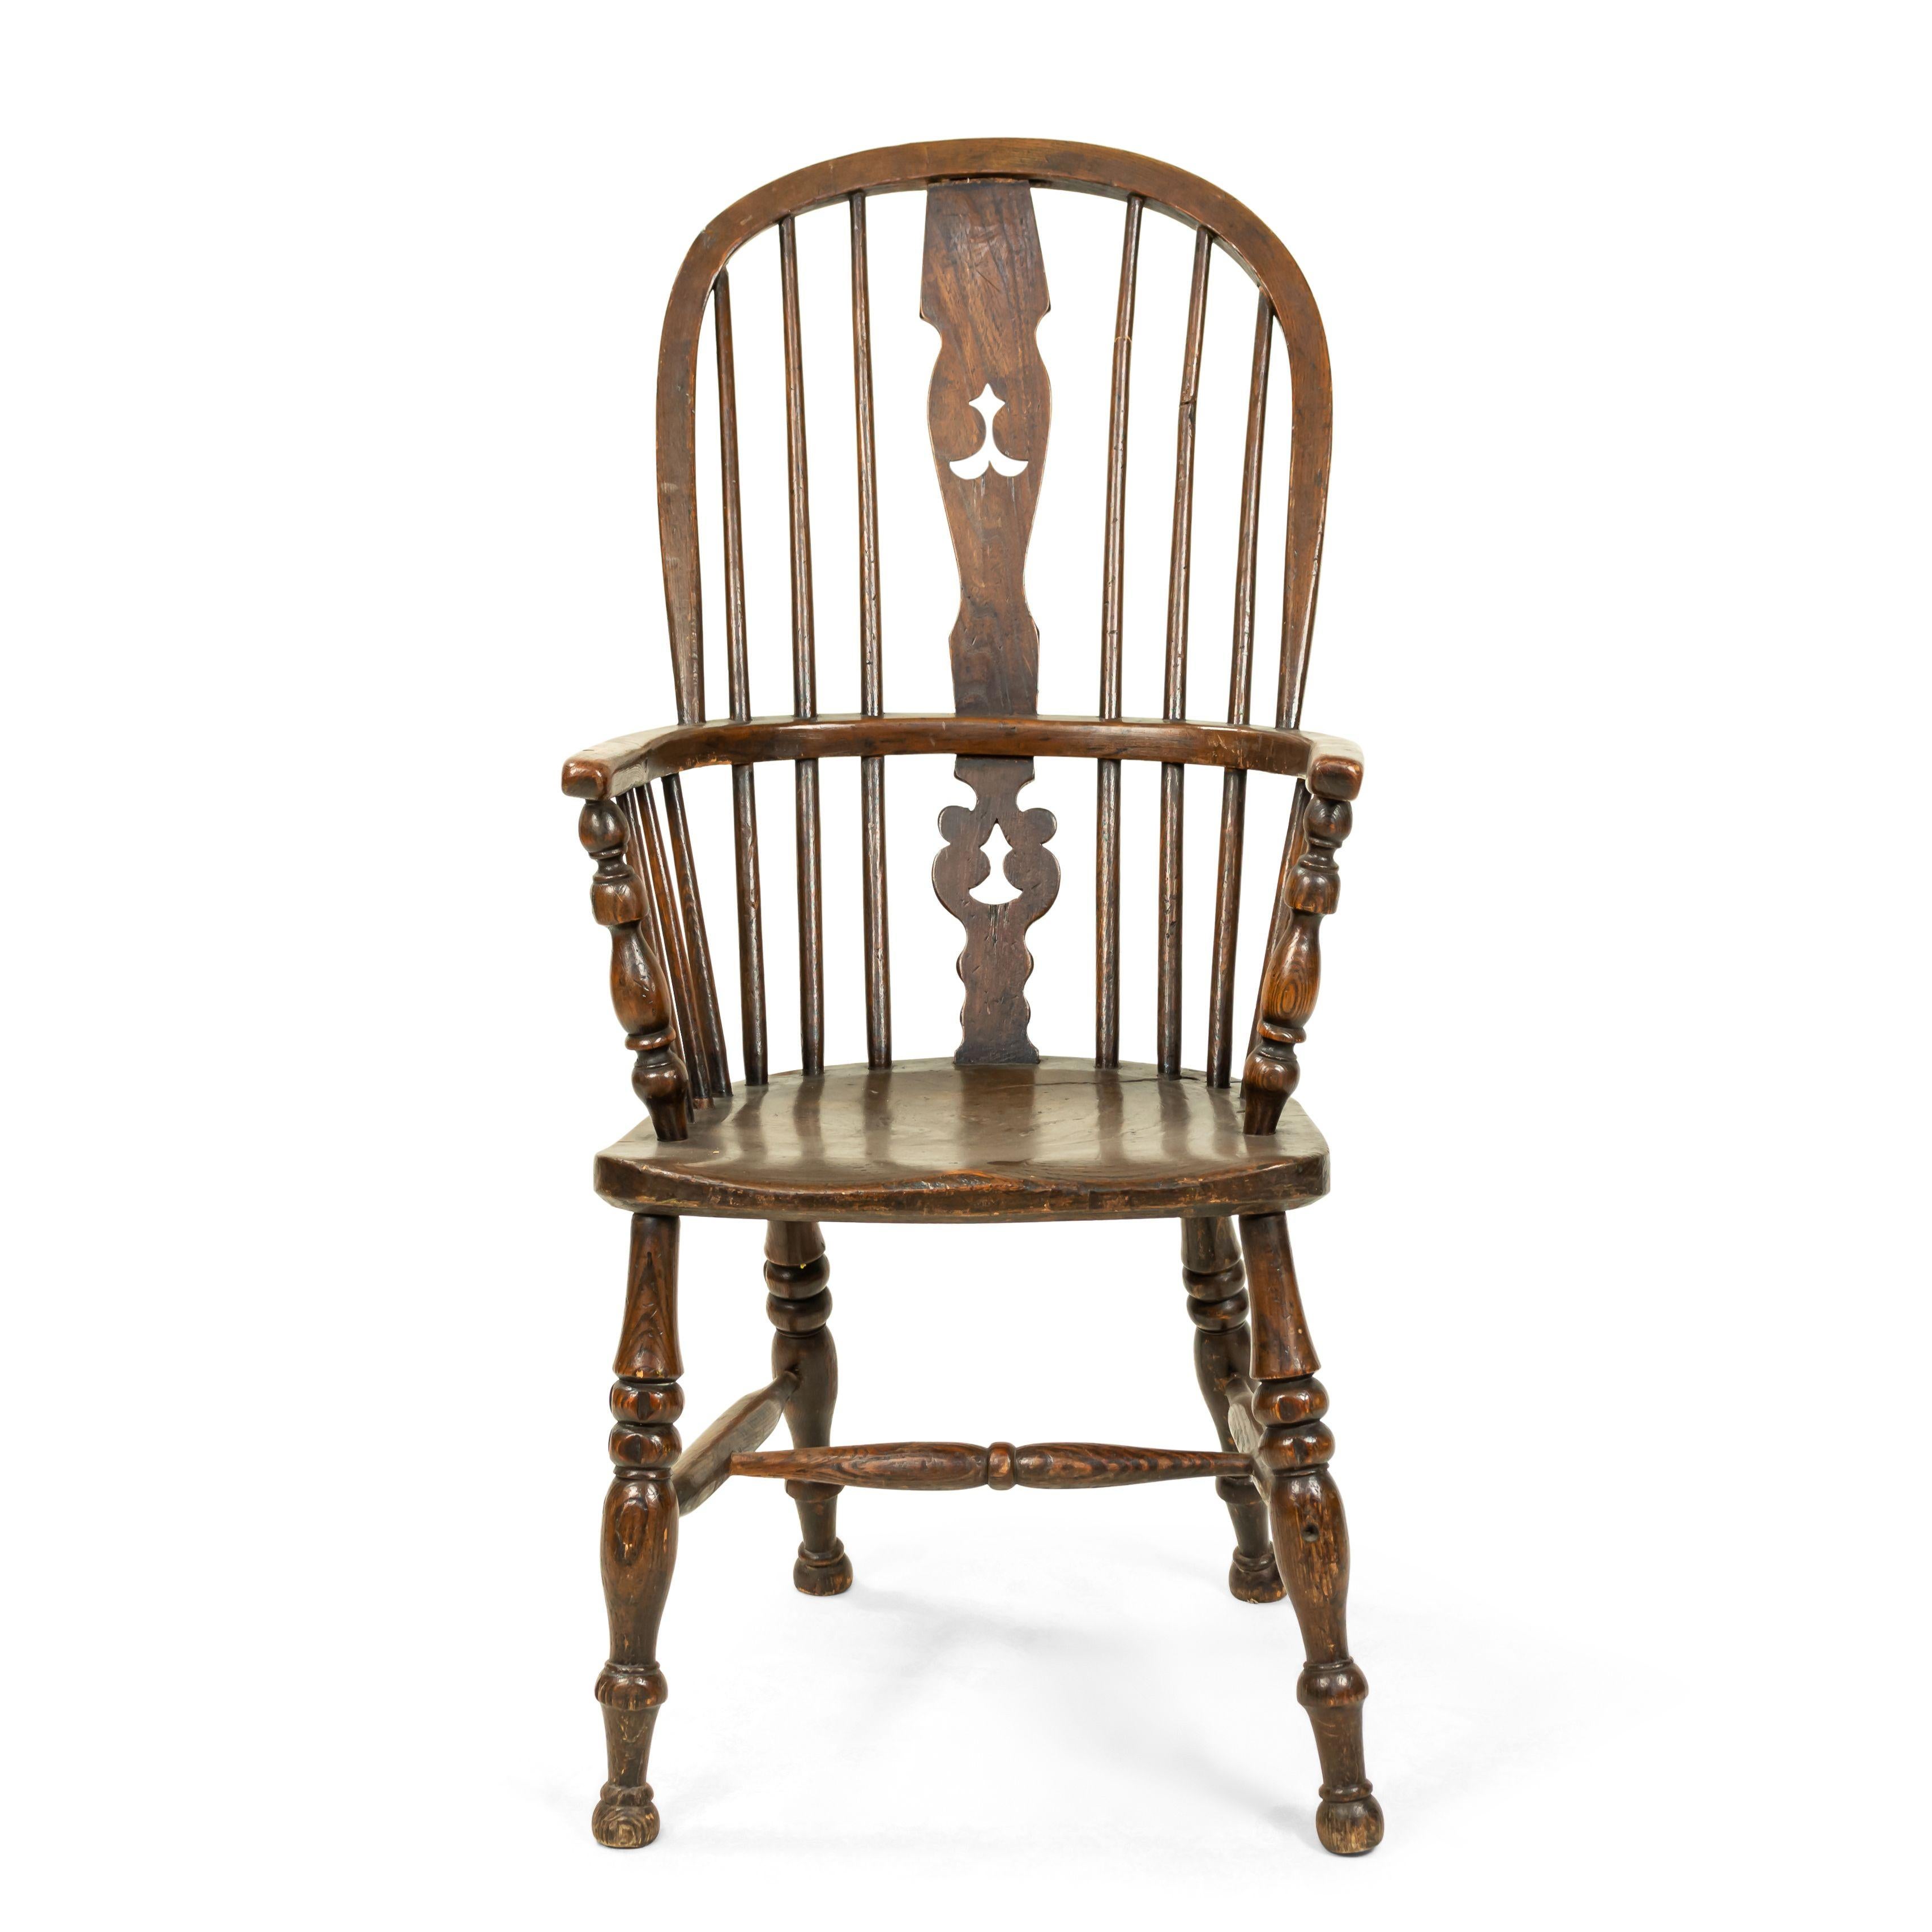 English country antique Windsor armchair with spindle and open splat back, (19th century).